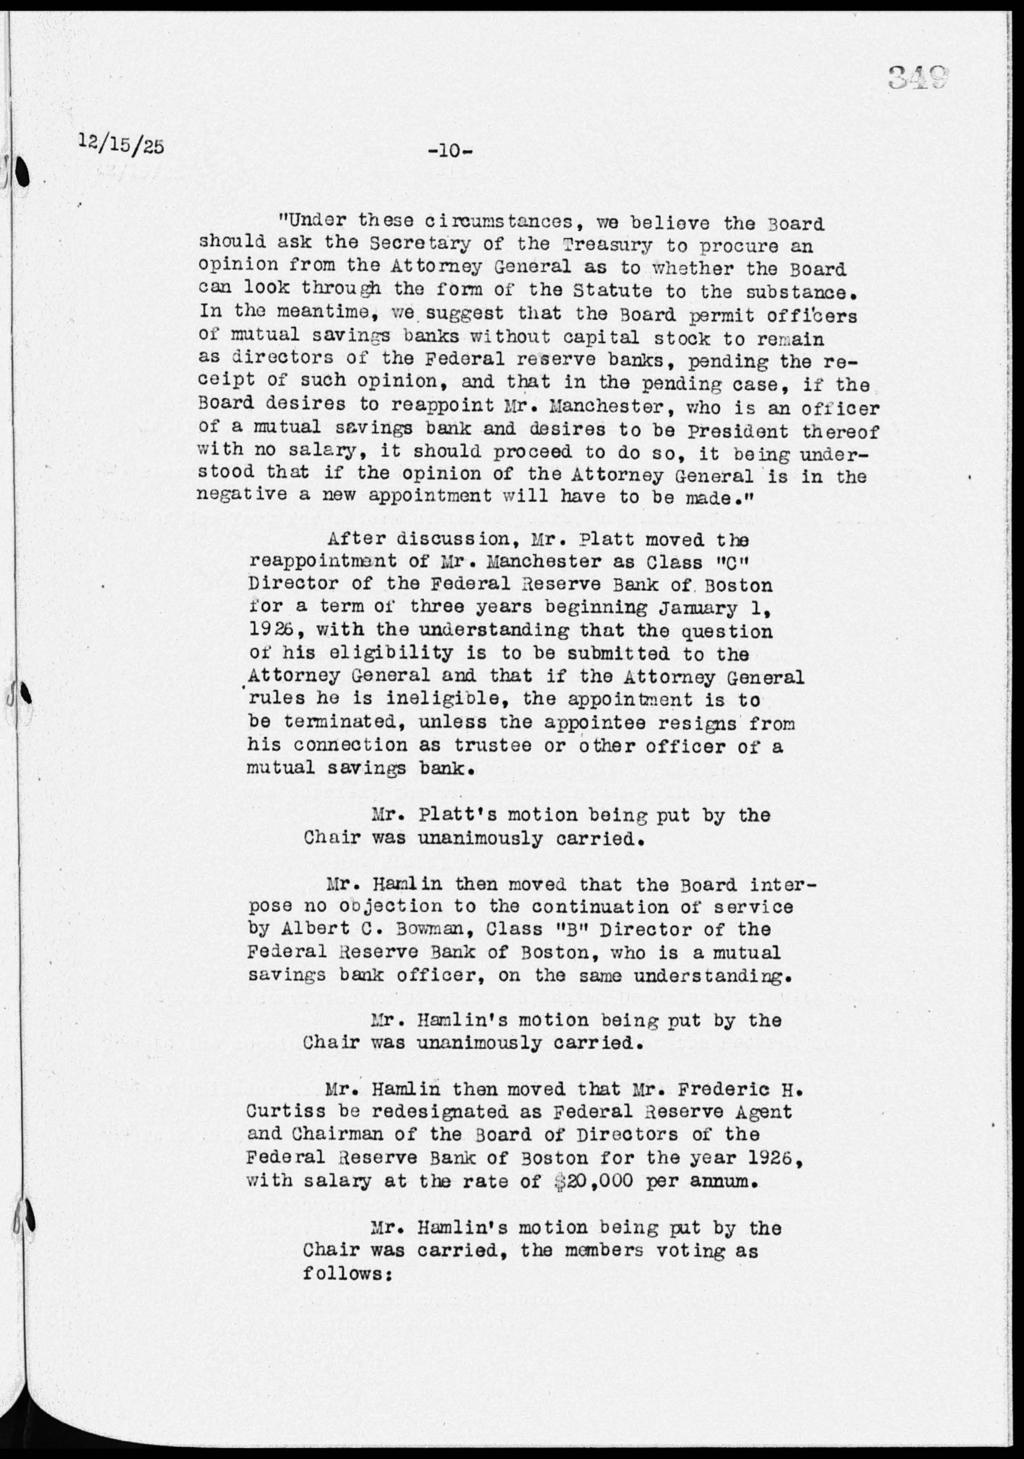 12/15/25-10- "Under these circumstances, we believe the Board should ask the Secretary of the Treasury to procure an opinion from the Attorney General as to whether the Board can look through the